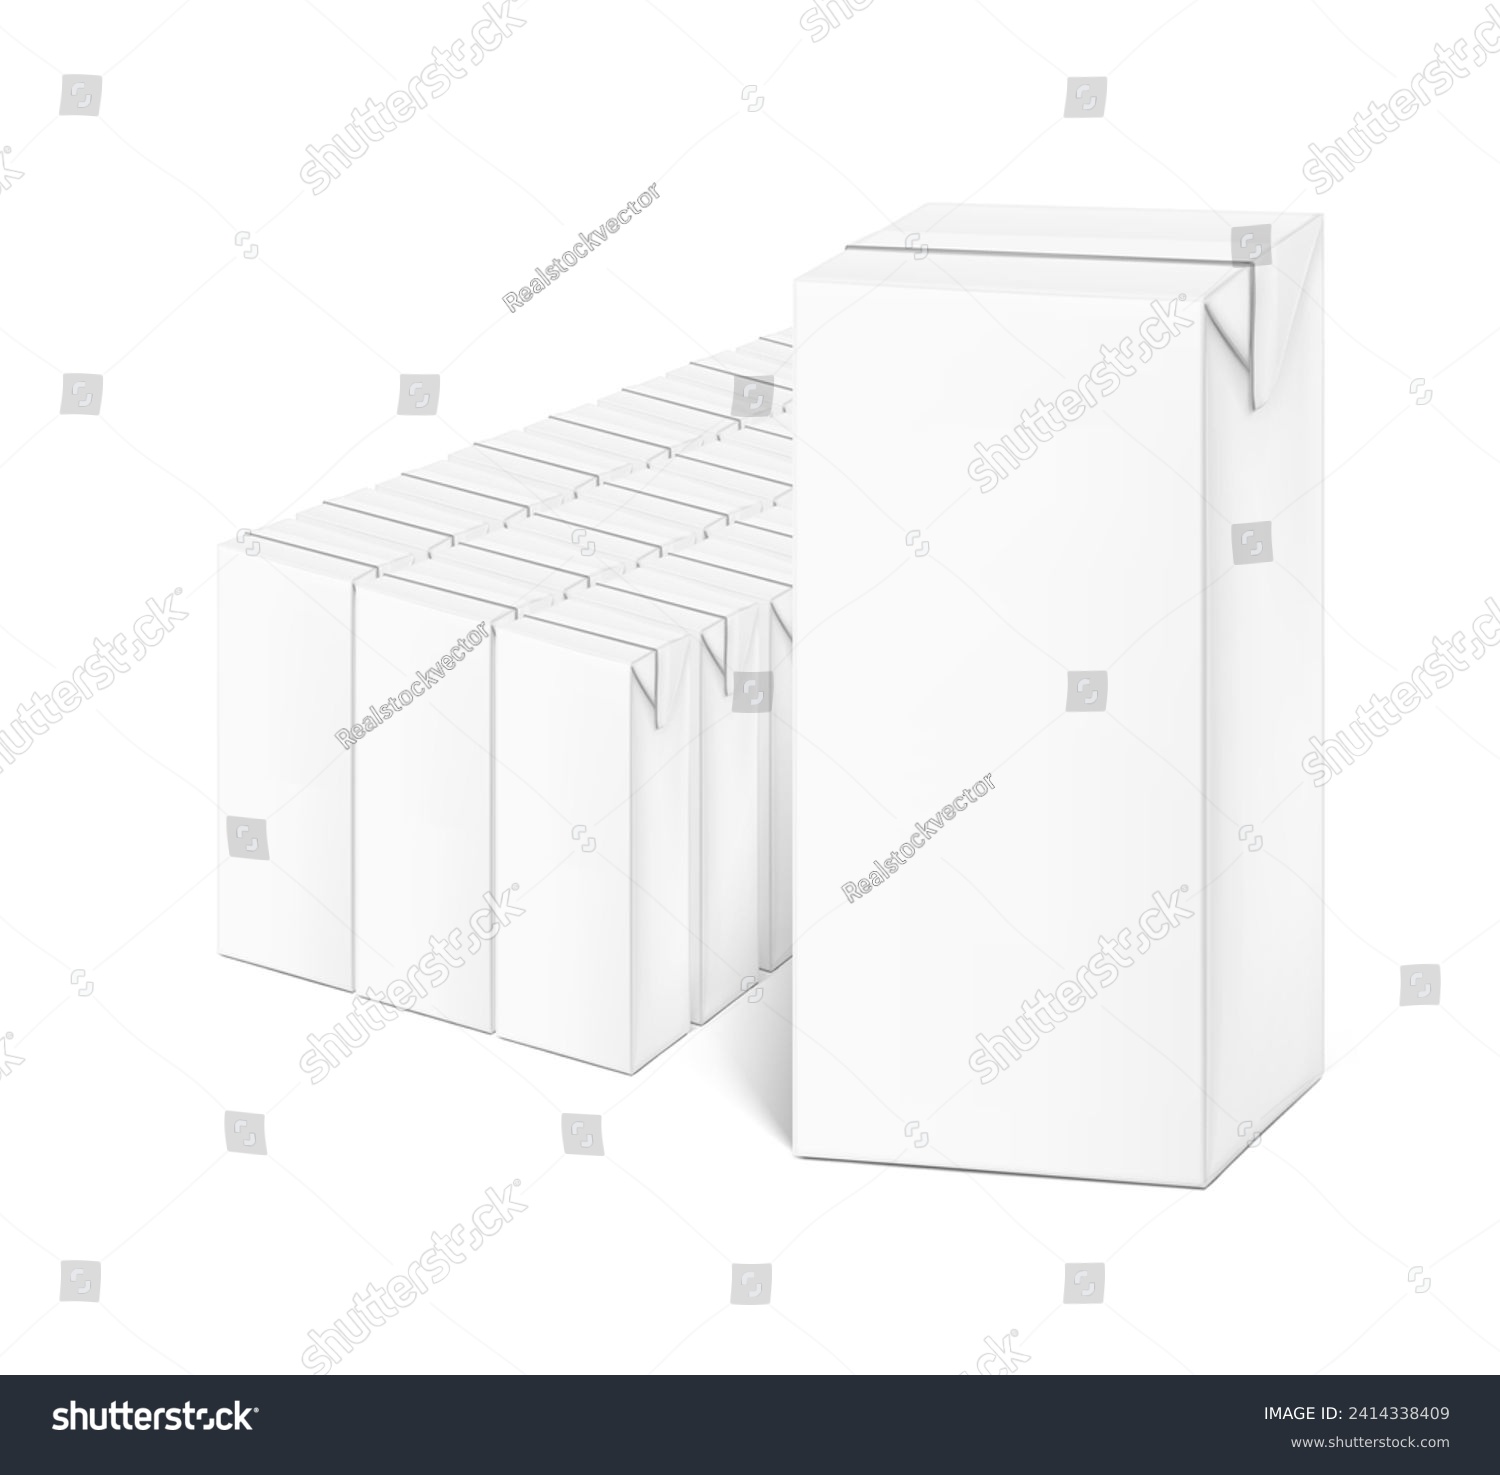 SVG of Packaging box multipack for milk, juice mockup. Vector illustration isolated on white background. Half side view. Ready and simple to use for your design. EPS10. svg